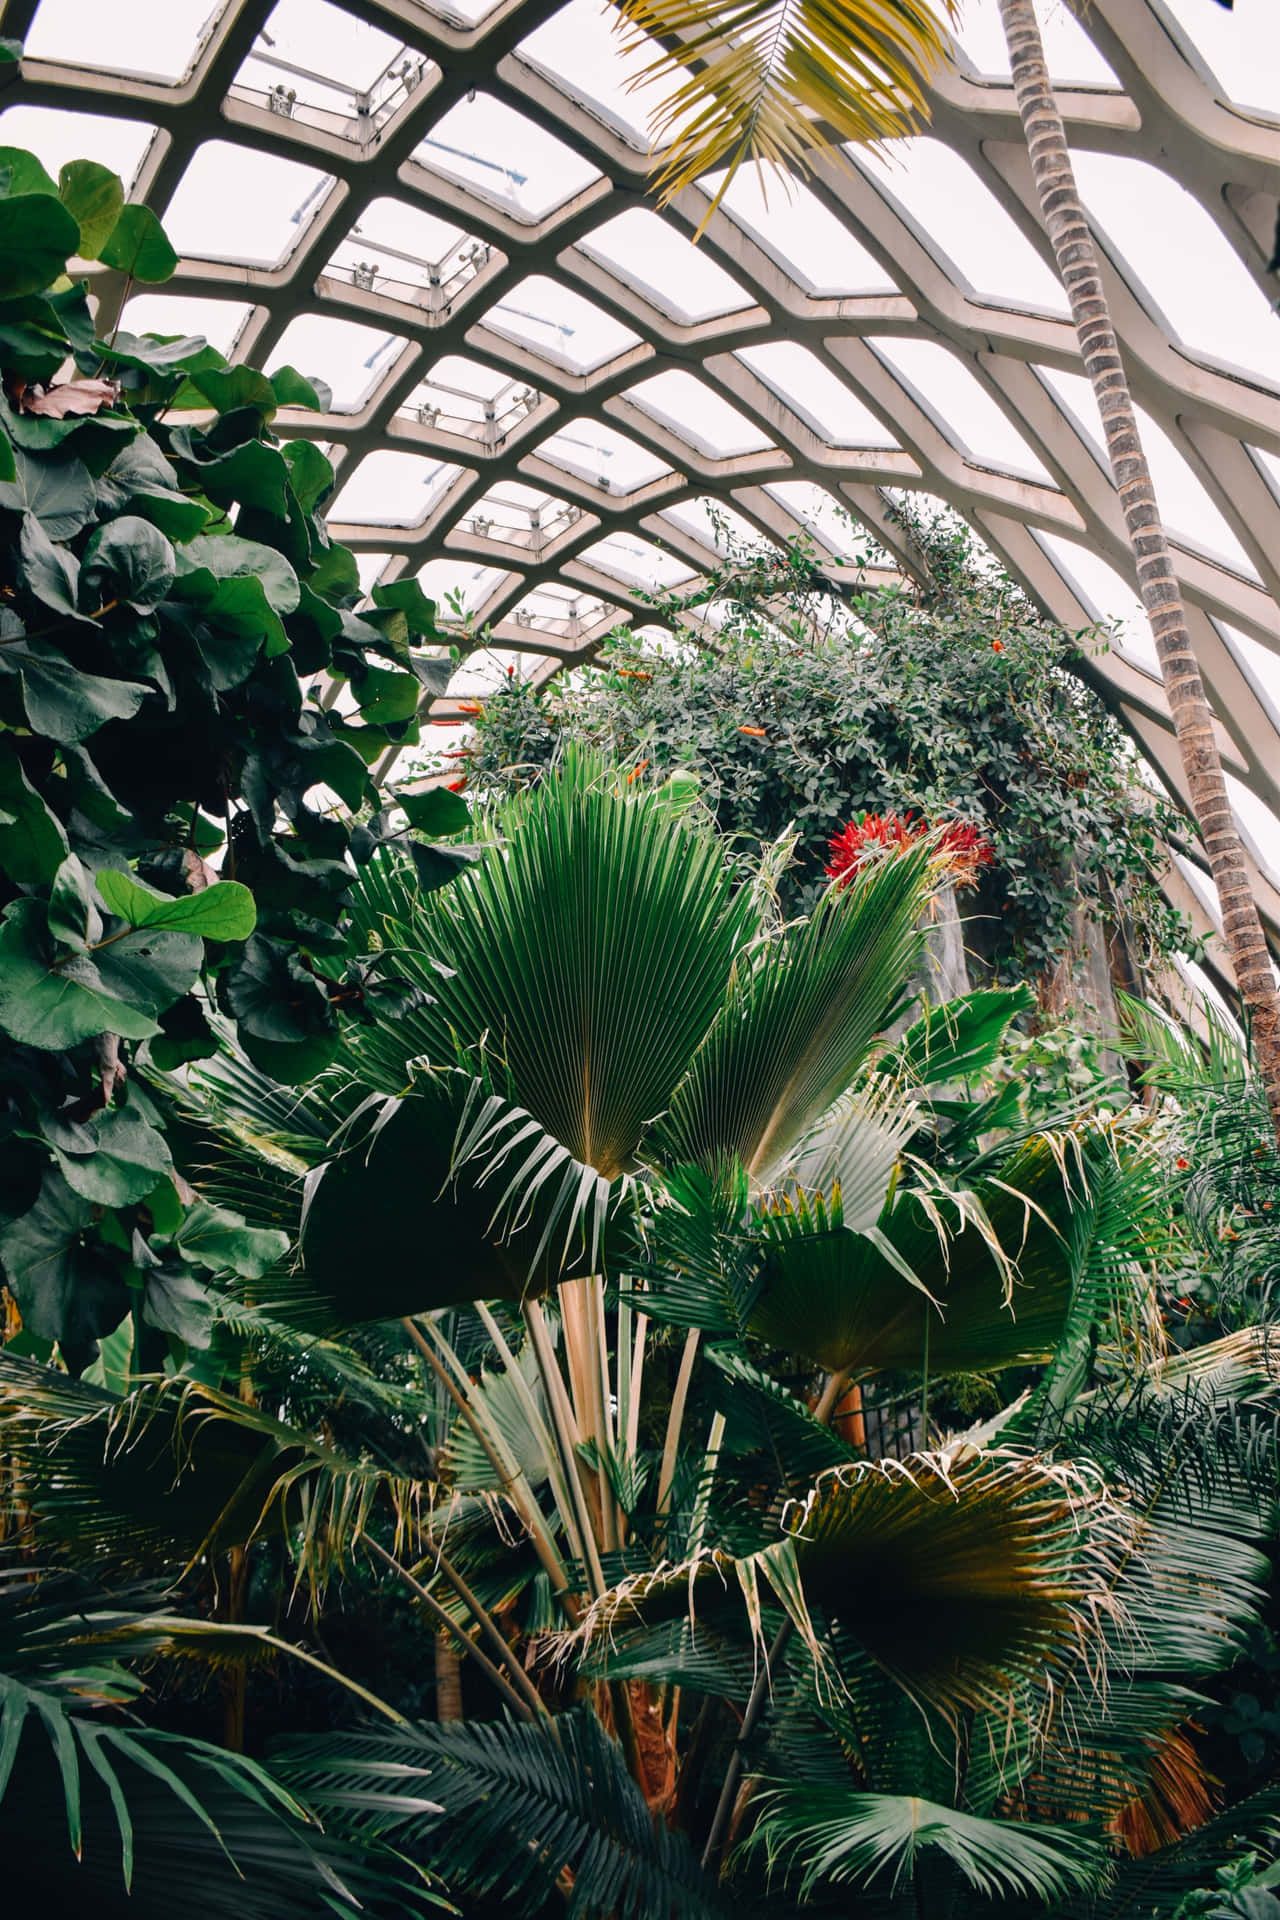 A large indoor greenhouse with tall palm trees and other tropical plants. - Botanical